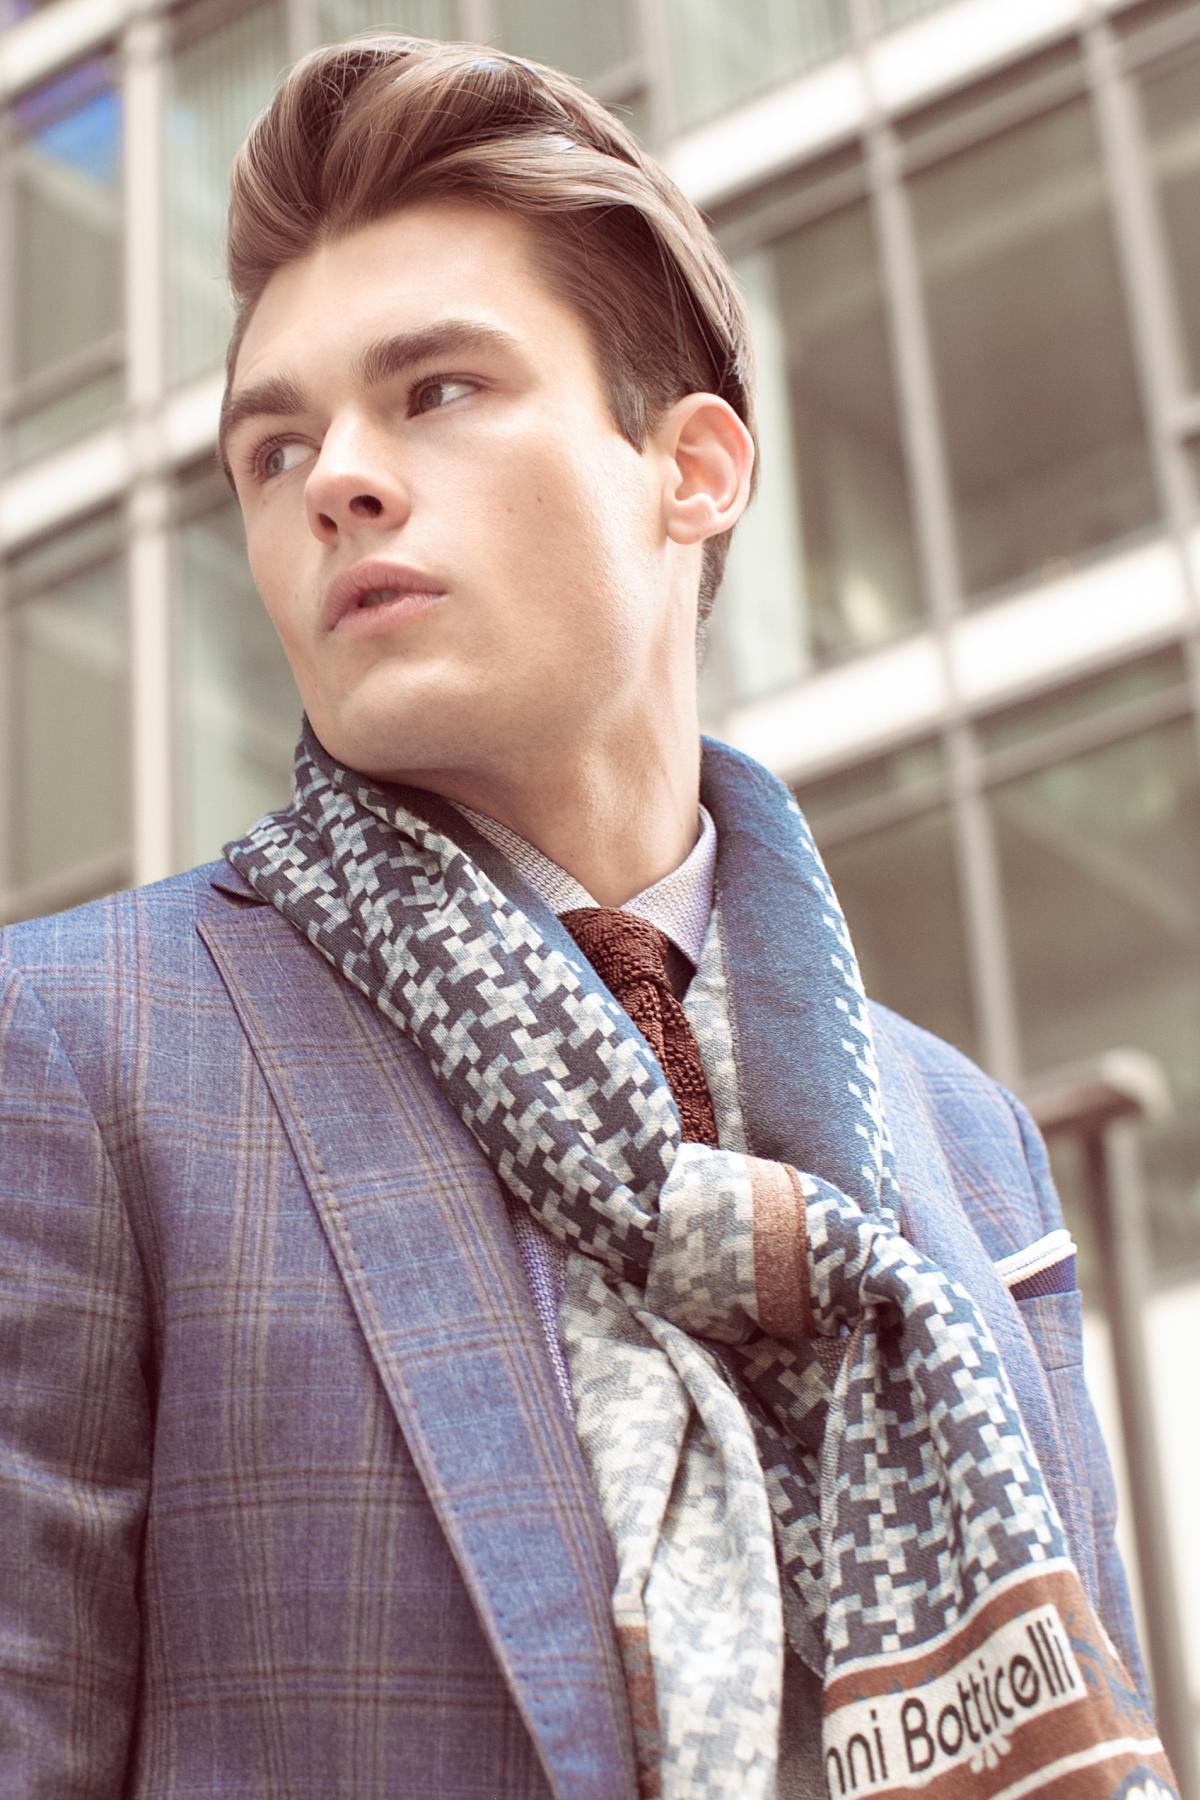 Scarf now in trends. Use it for cold season with classic suit